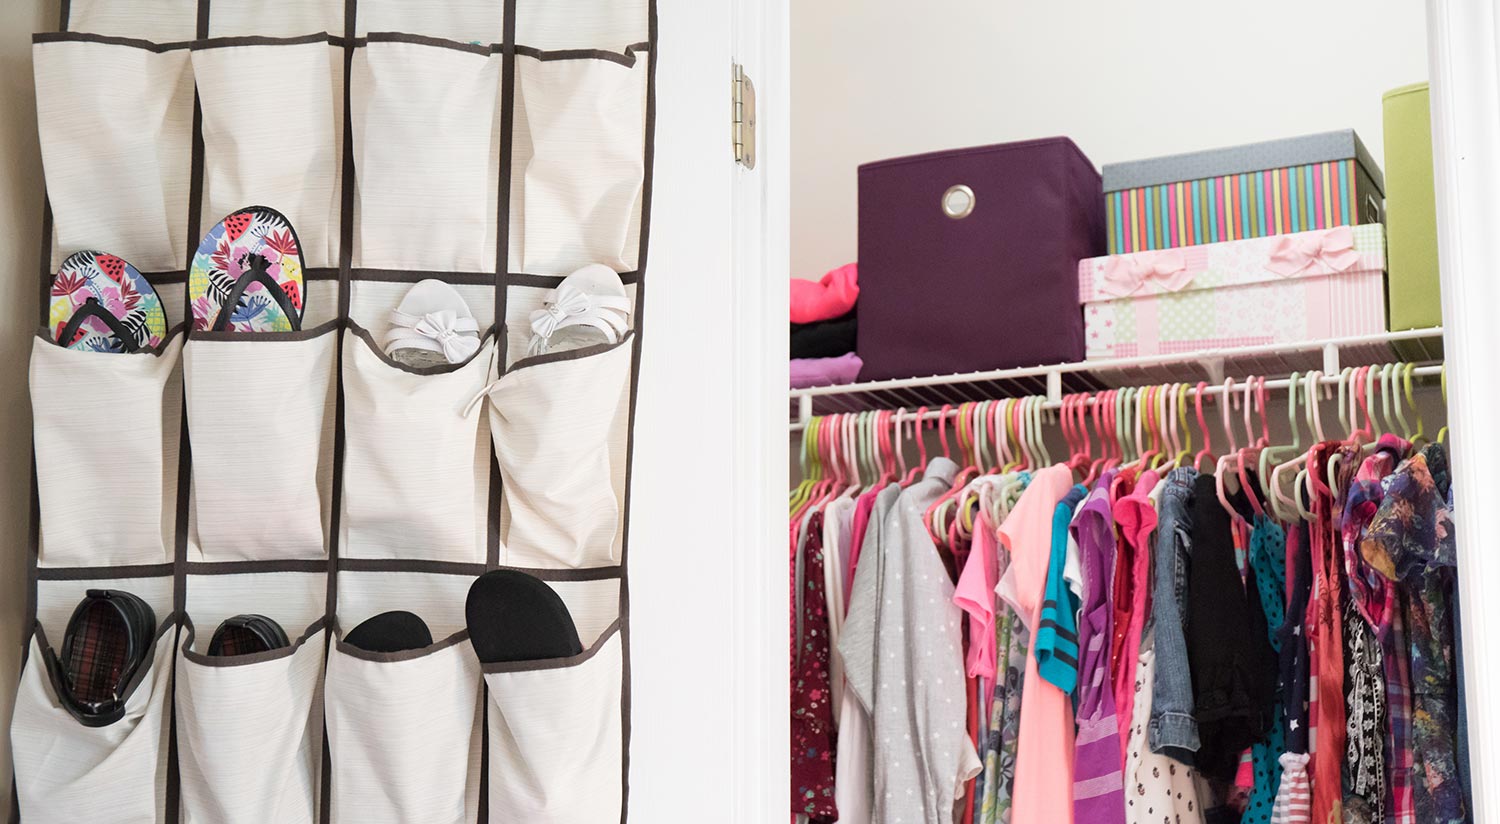 A young girl's closet neatly organized with bins and boxes and a shoe rack hanging on the door